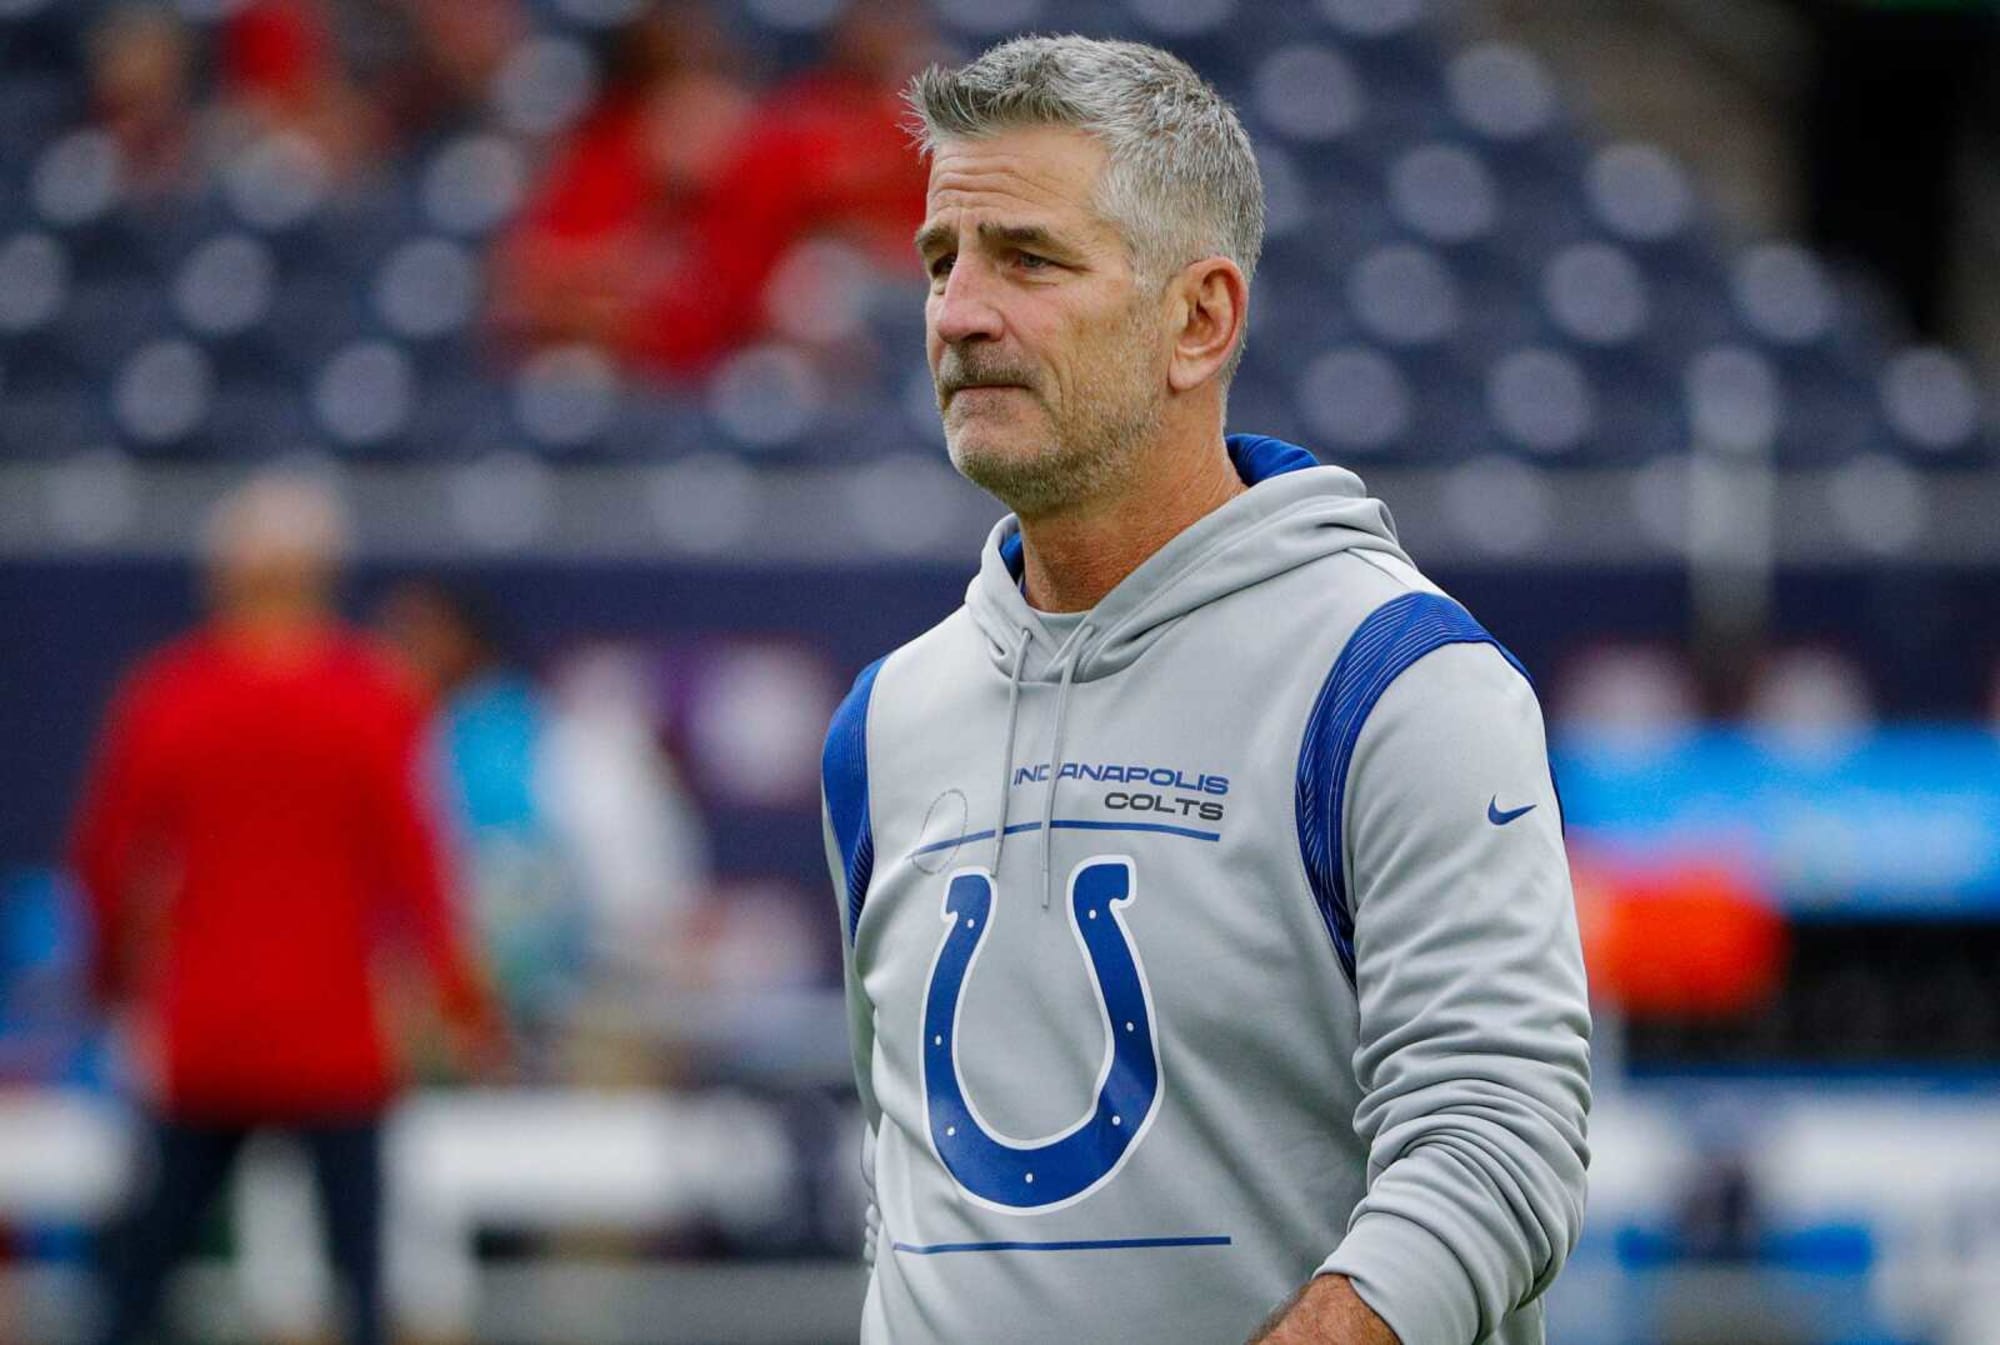 An underrated NFL head coach among hot seat candidates in 2022